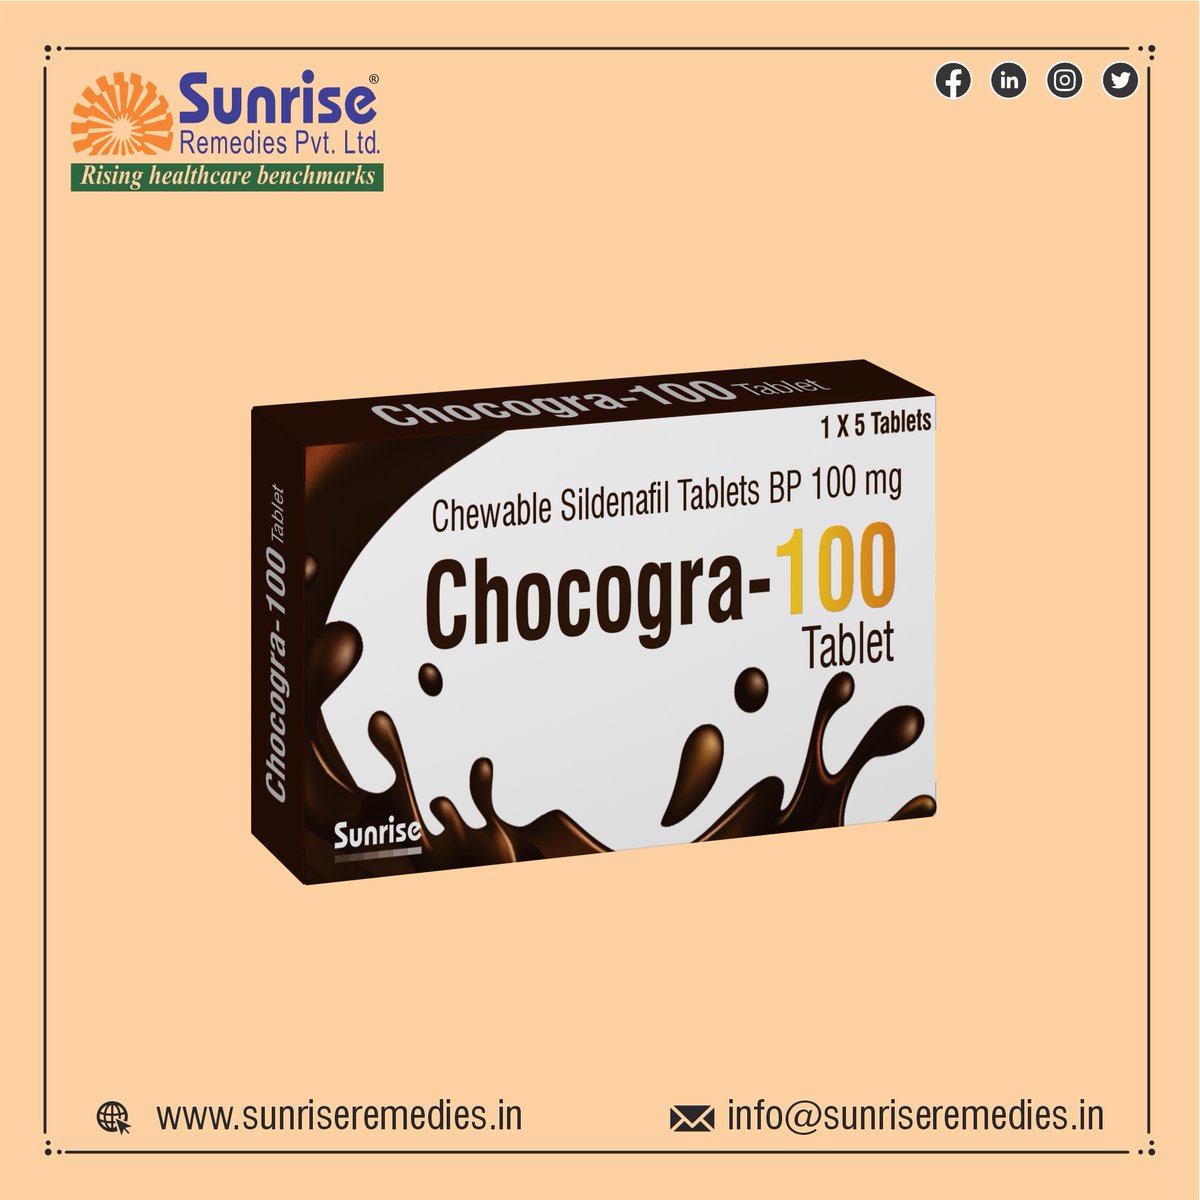 Chocogra Chewable Generic Sildenafil Chewable Most Popular Products From Sunrise Remedies Pvt. Ltd.  

Read More: sunriseremedies.in/our-products/c…

#SildenafilChewable #TadalafilChewable #Dapoxetine #Vardenafil #Avanafil #Udenafil #EDproducts #PEProducts #PharmaceuticalCompany #Sunrise